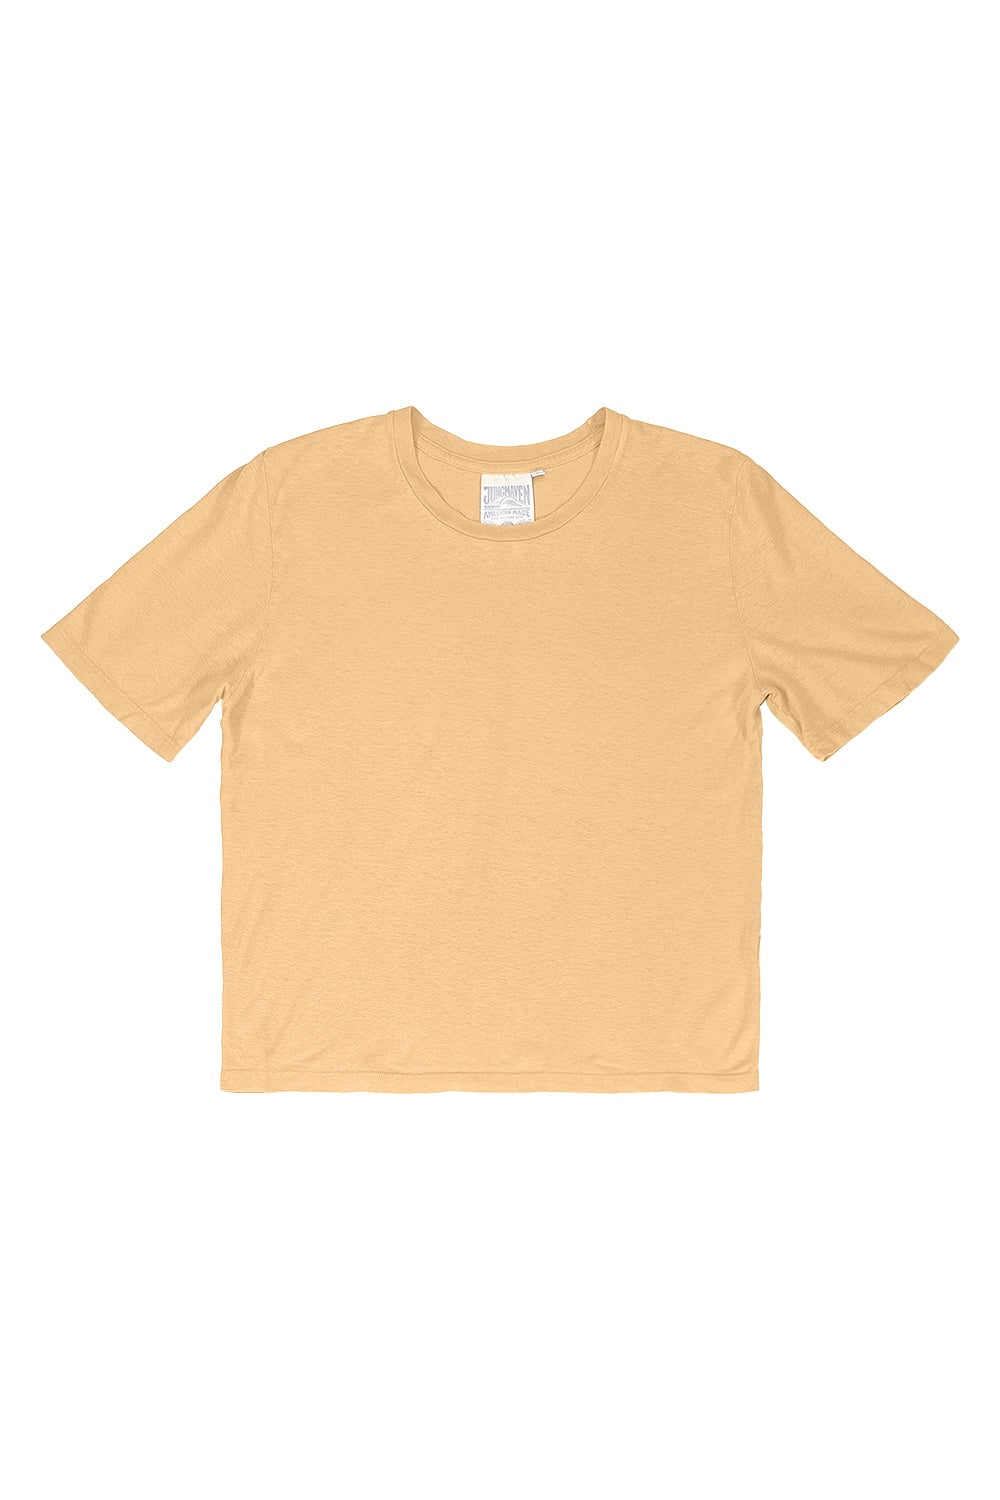 Silverlake Cropped Tee | Jungmaven Hemp Clothing & Accessories / Color: Oat Milk